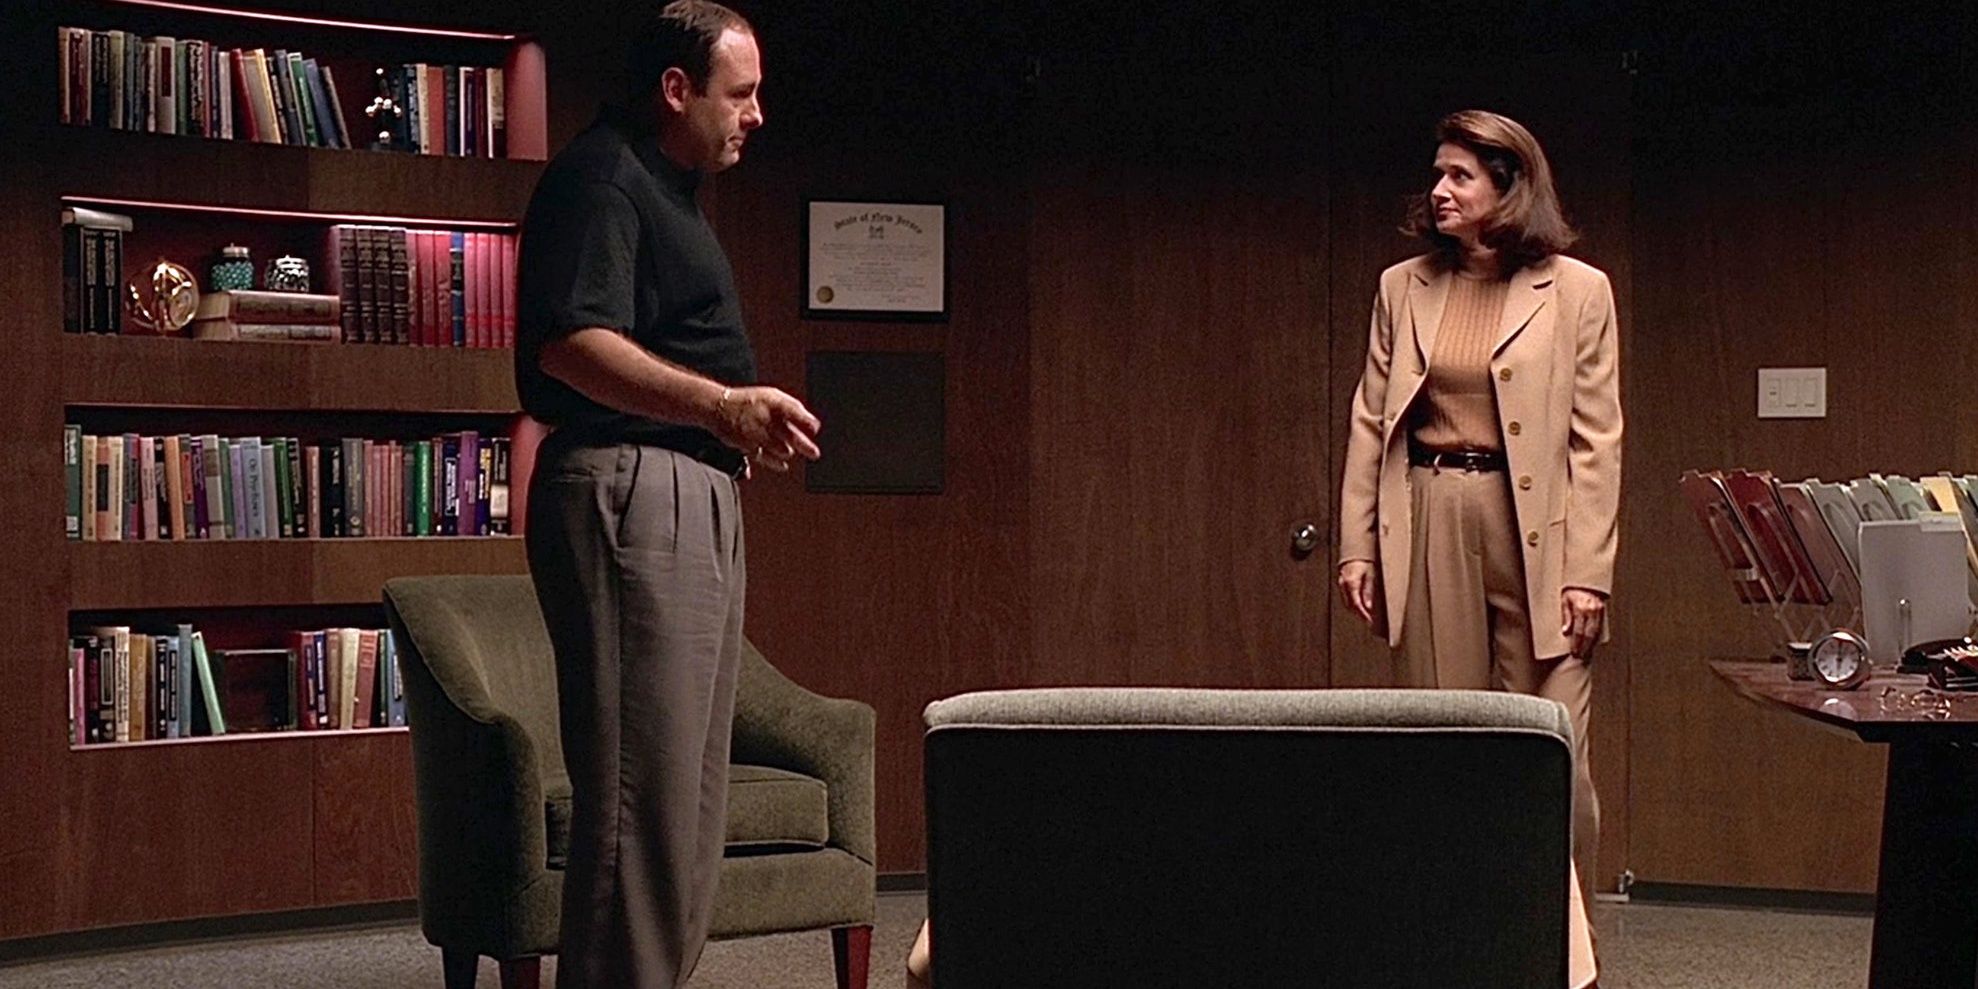 Dr. Melfi says goodbye to Tony after one of their therapy sessions